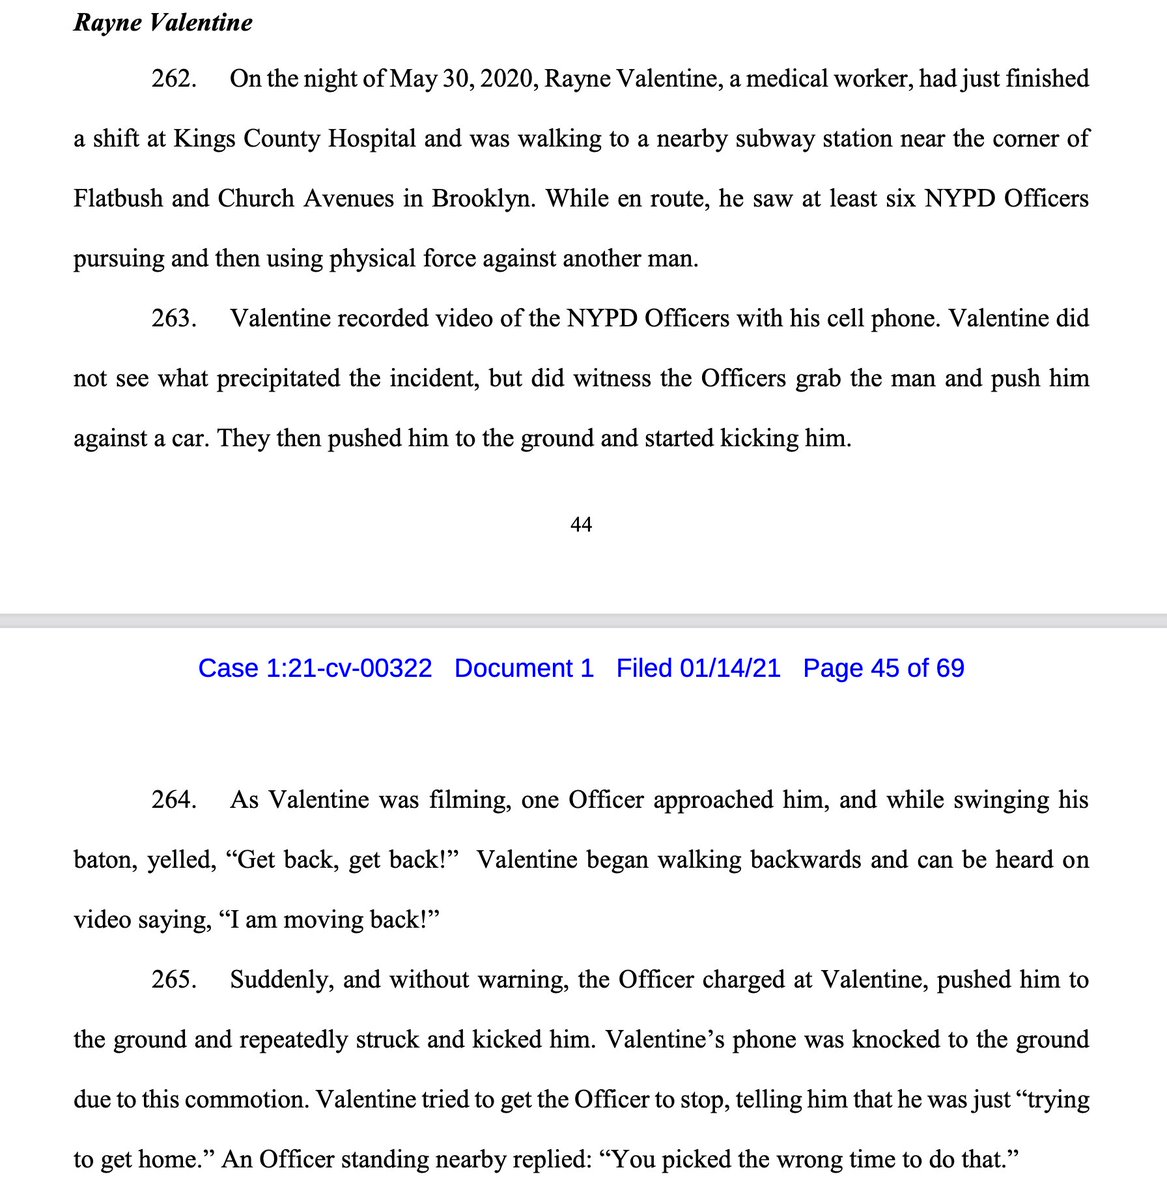 Our courageous client Rayne Valentine, some of whose experiences around being brutalized by the NYPD are sumarrized in the AG's complaint in the passages below, also spoke to those experiences during the AG's press conference this morning